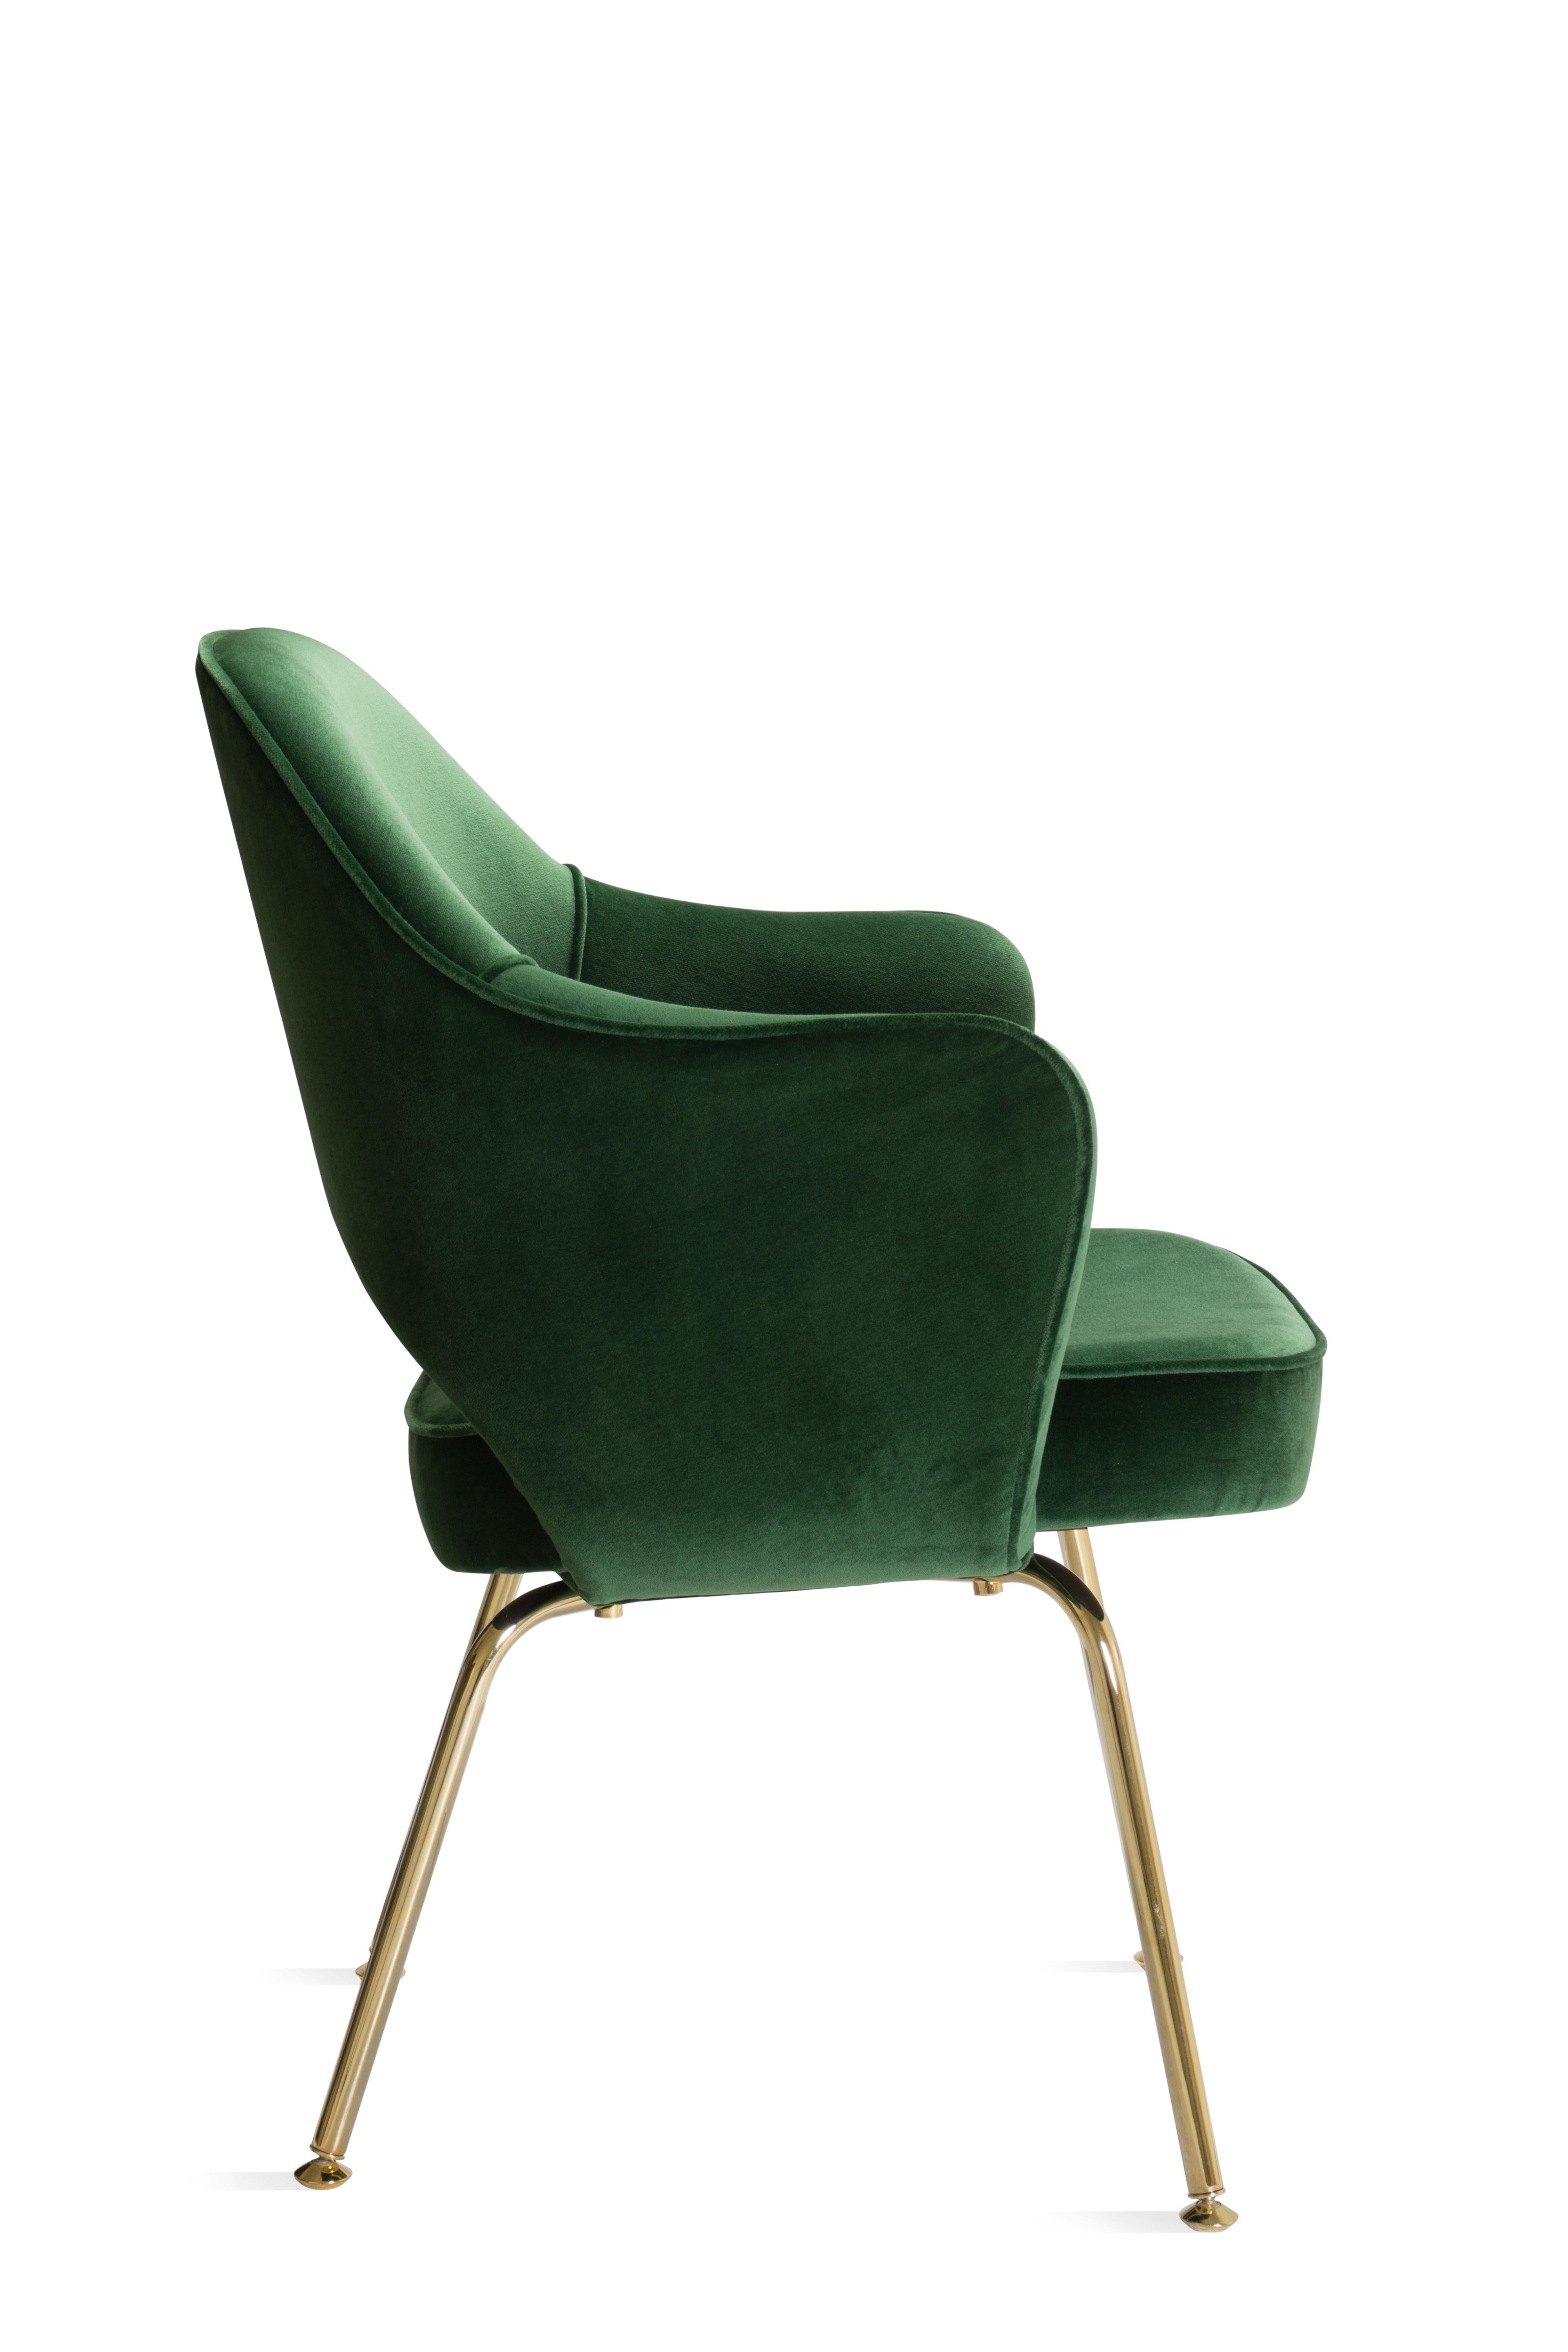 Saarinen Executive Arm Chairs in Emerald Velvet, Gold Edition, Set of 6 In Excellent Condition For Sale In Wilton, CT